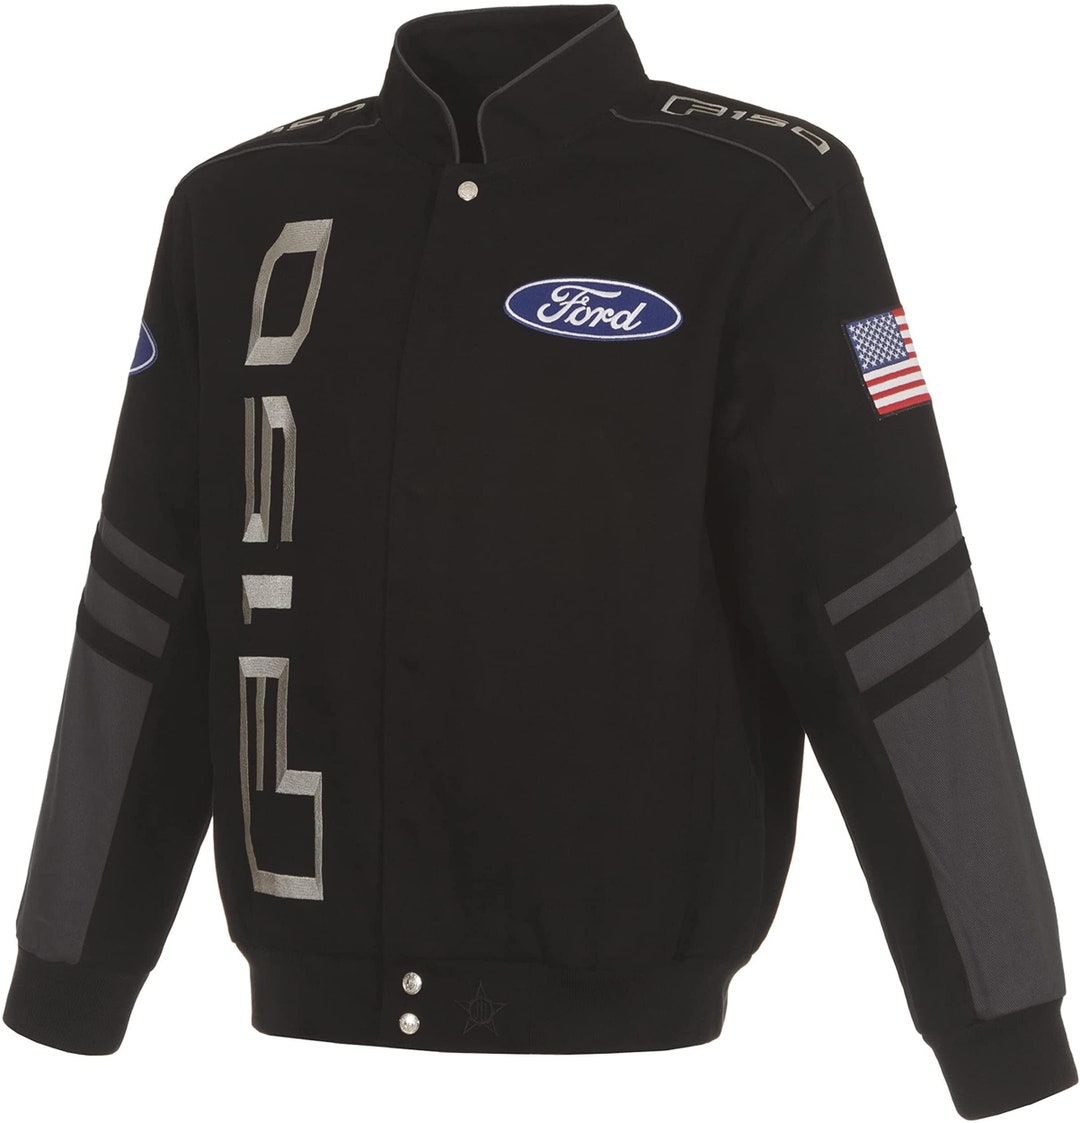 Men's Ford F150 Jacket an Embroidered Classic Twill Coat - Etsy